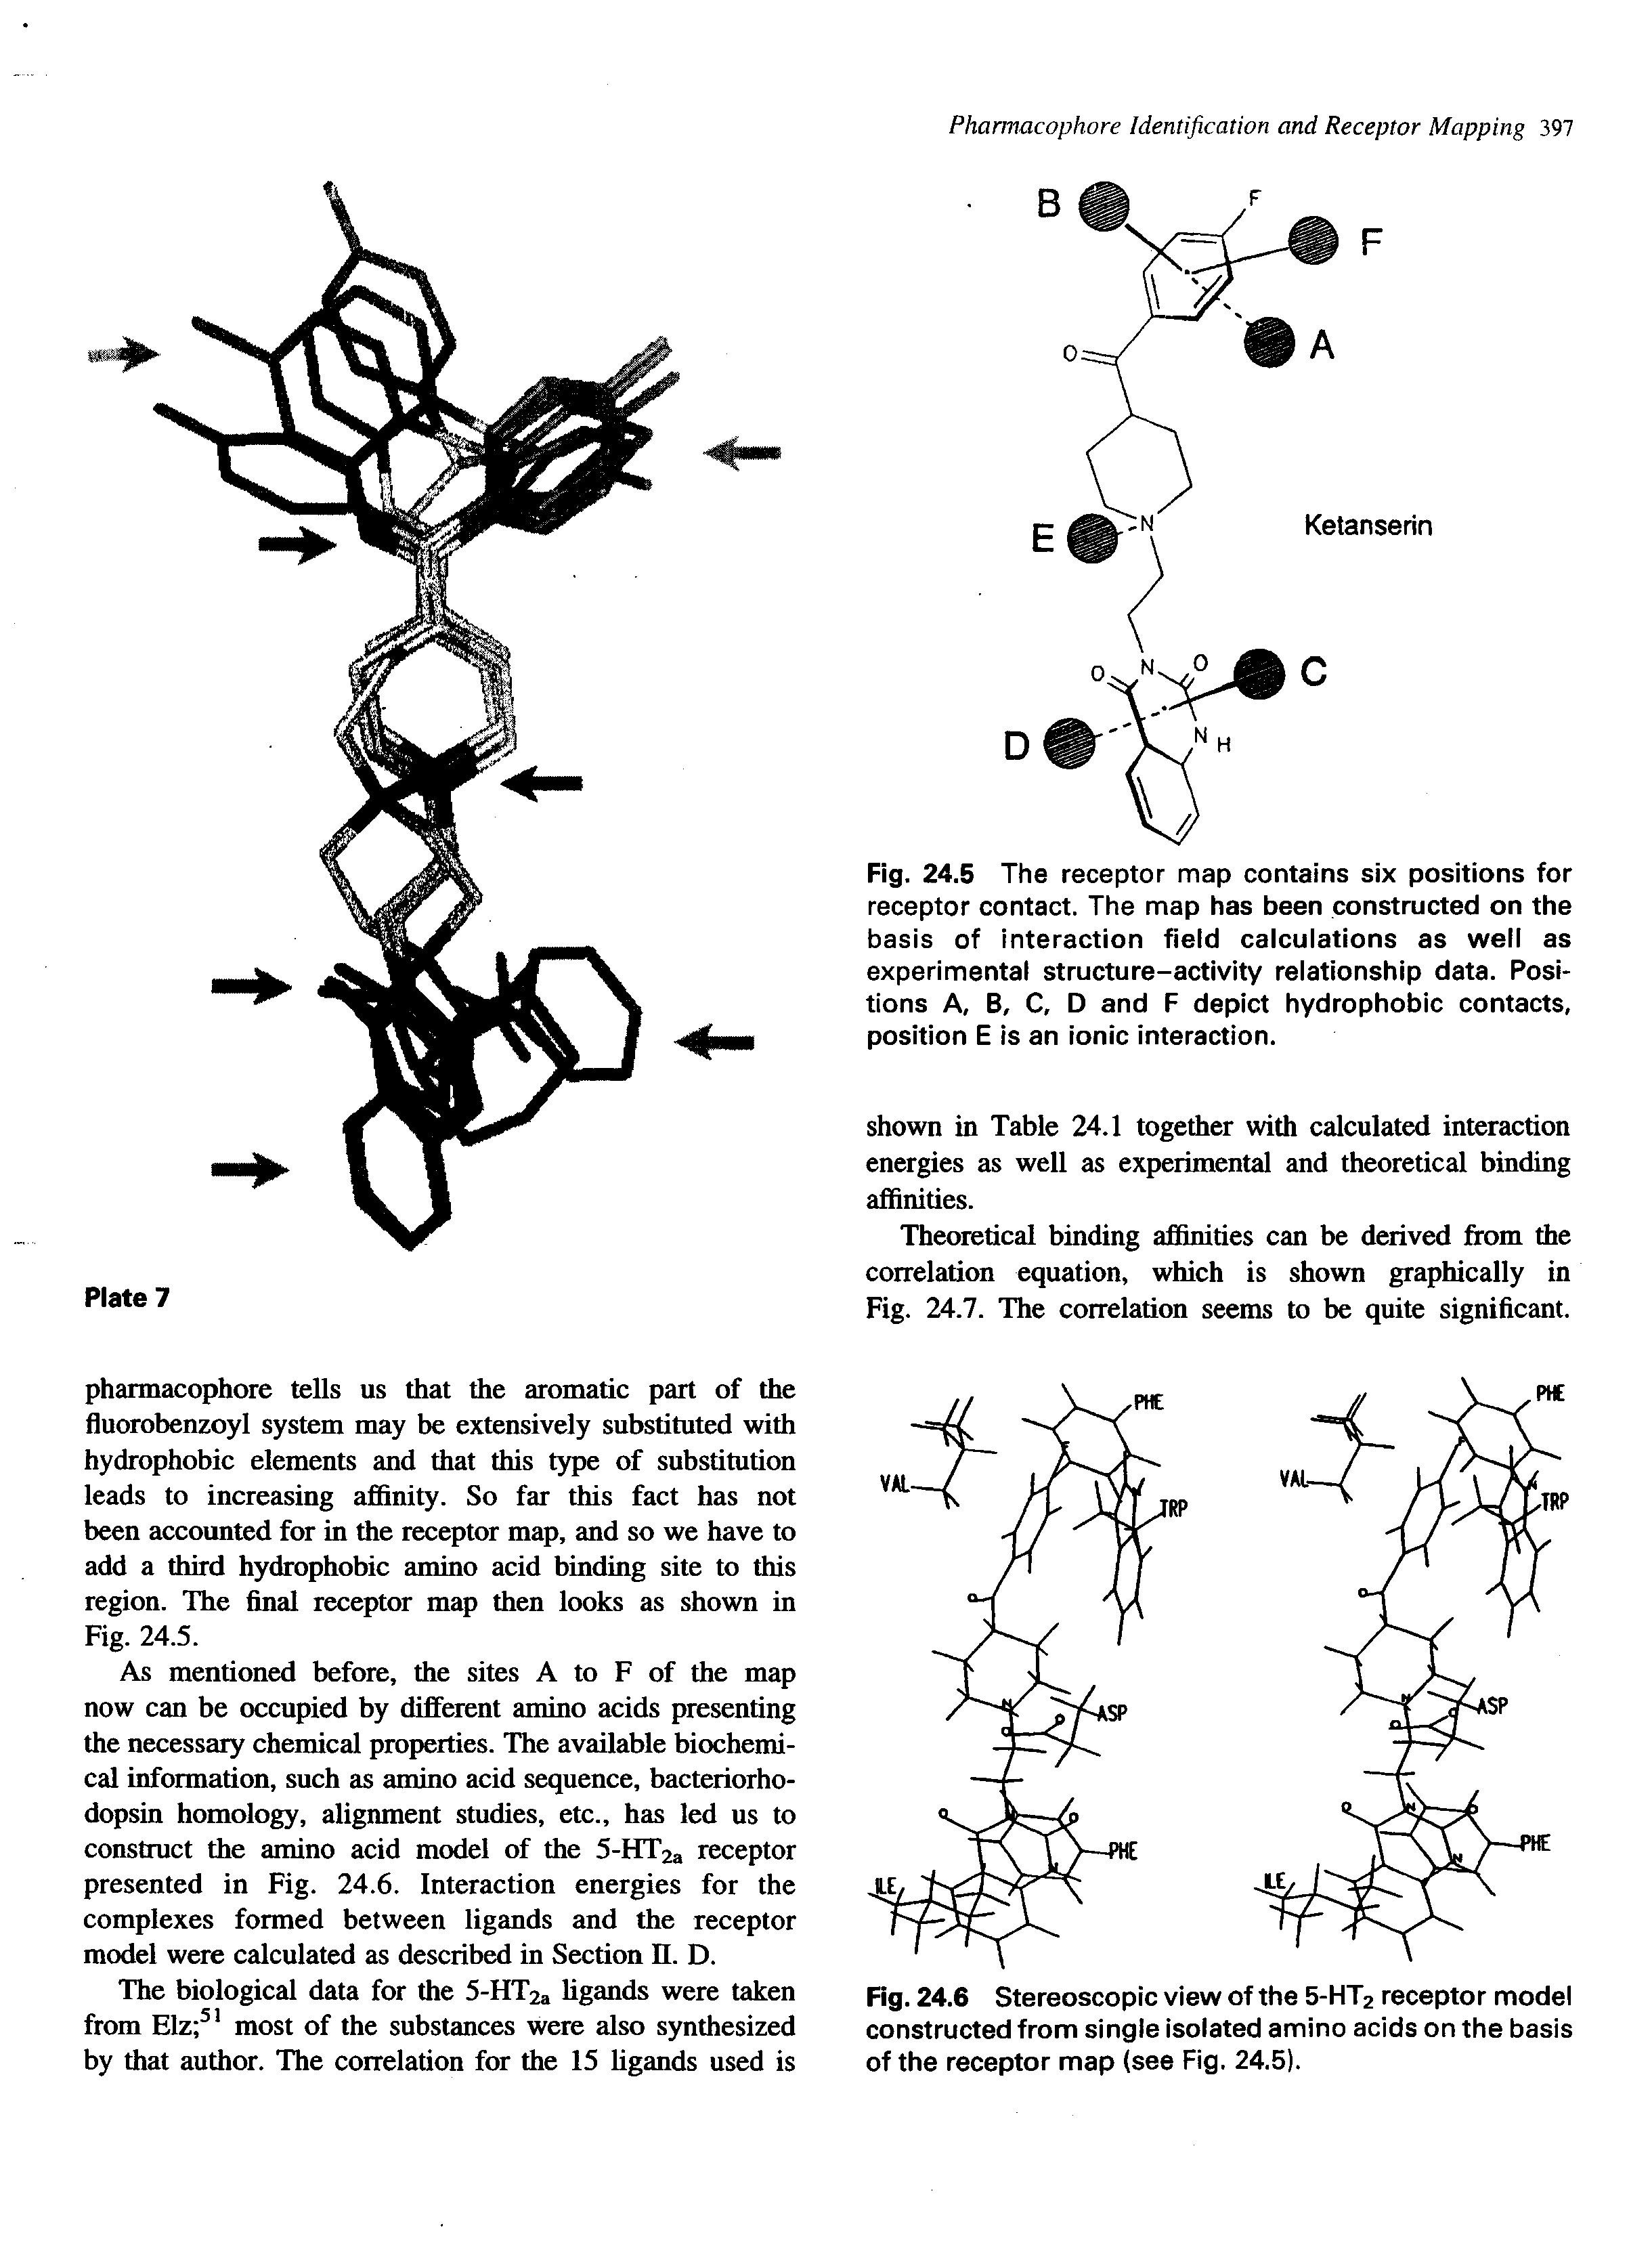 Fig. 24.5 The receptor map contains six positions for receptor contact. The map has been constructed on the basis of interaction field calculations as well as experimental structure-activity relationship data. Positions A, B, C, D and F depict hydrophobic contacts, position E is an ionic interaction.